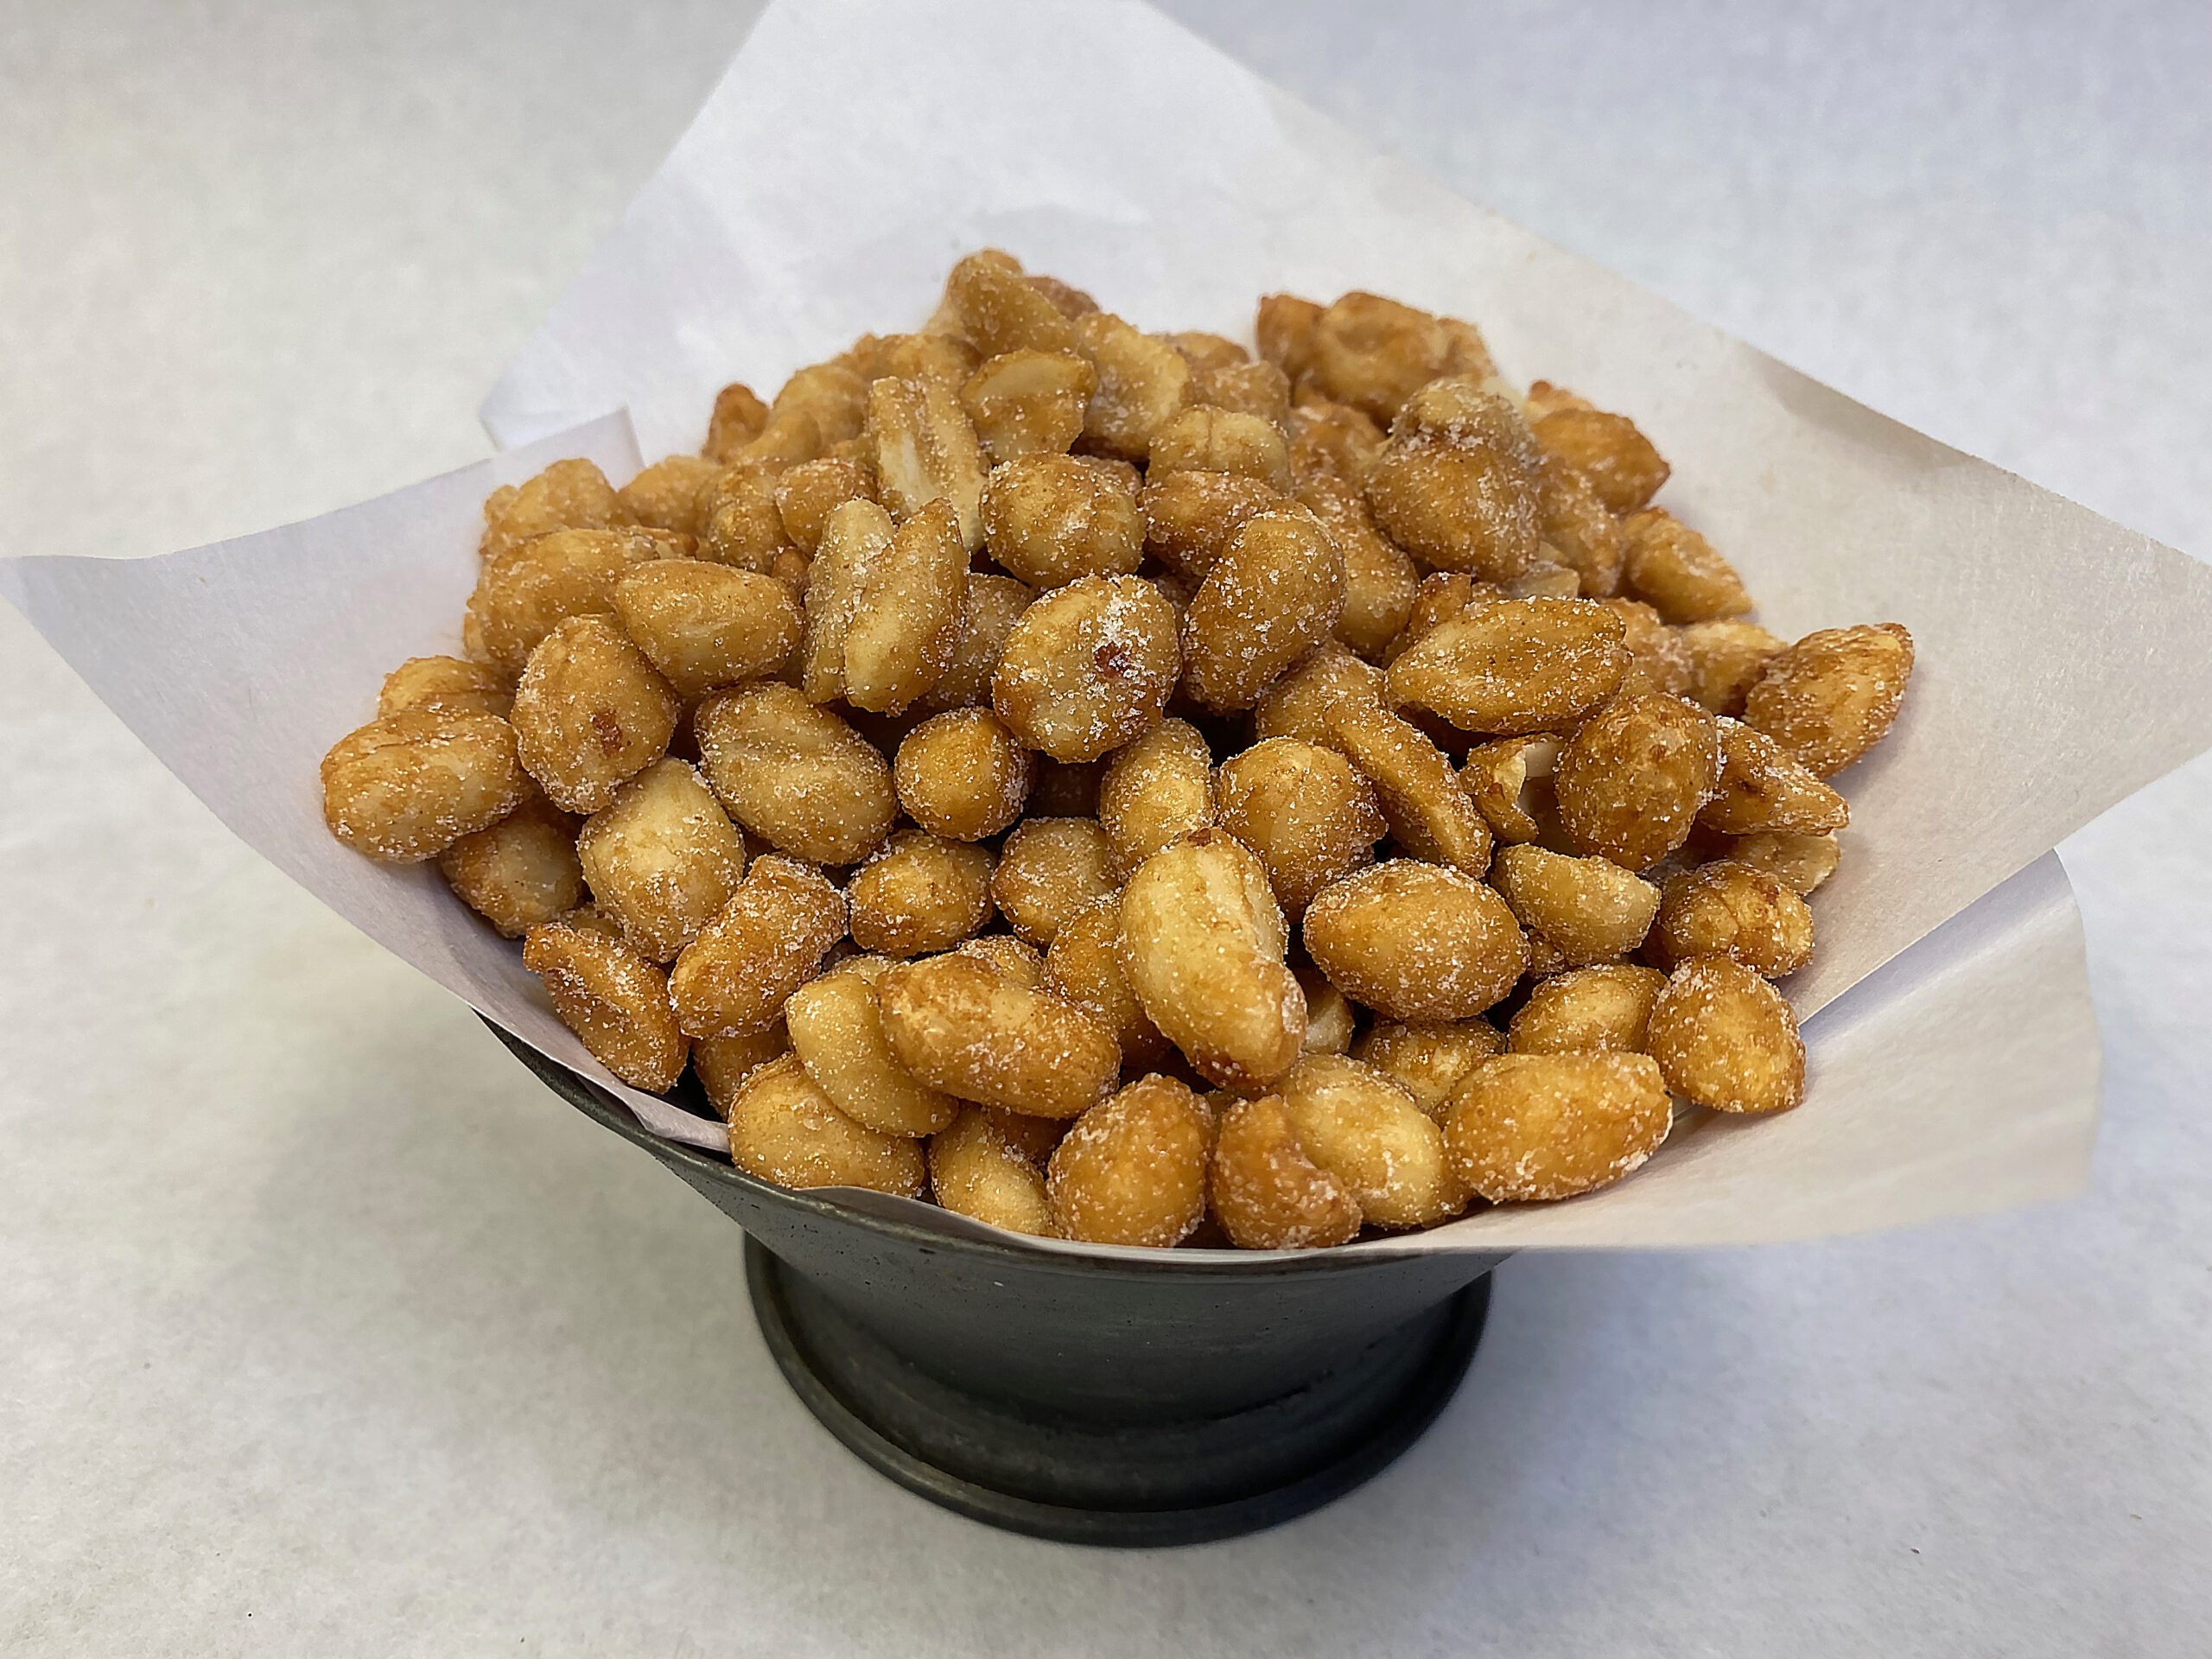 Homemade Honey Roasted Peanuts - Served From Scratch